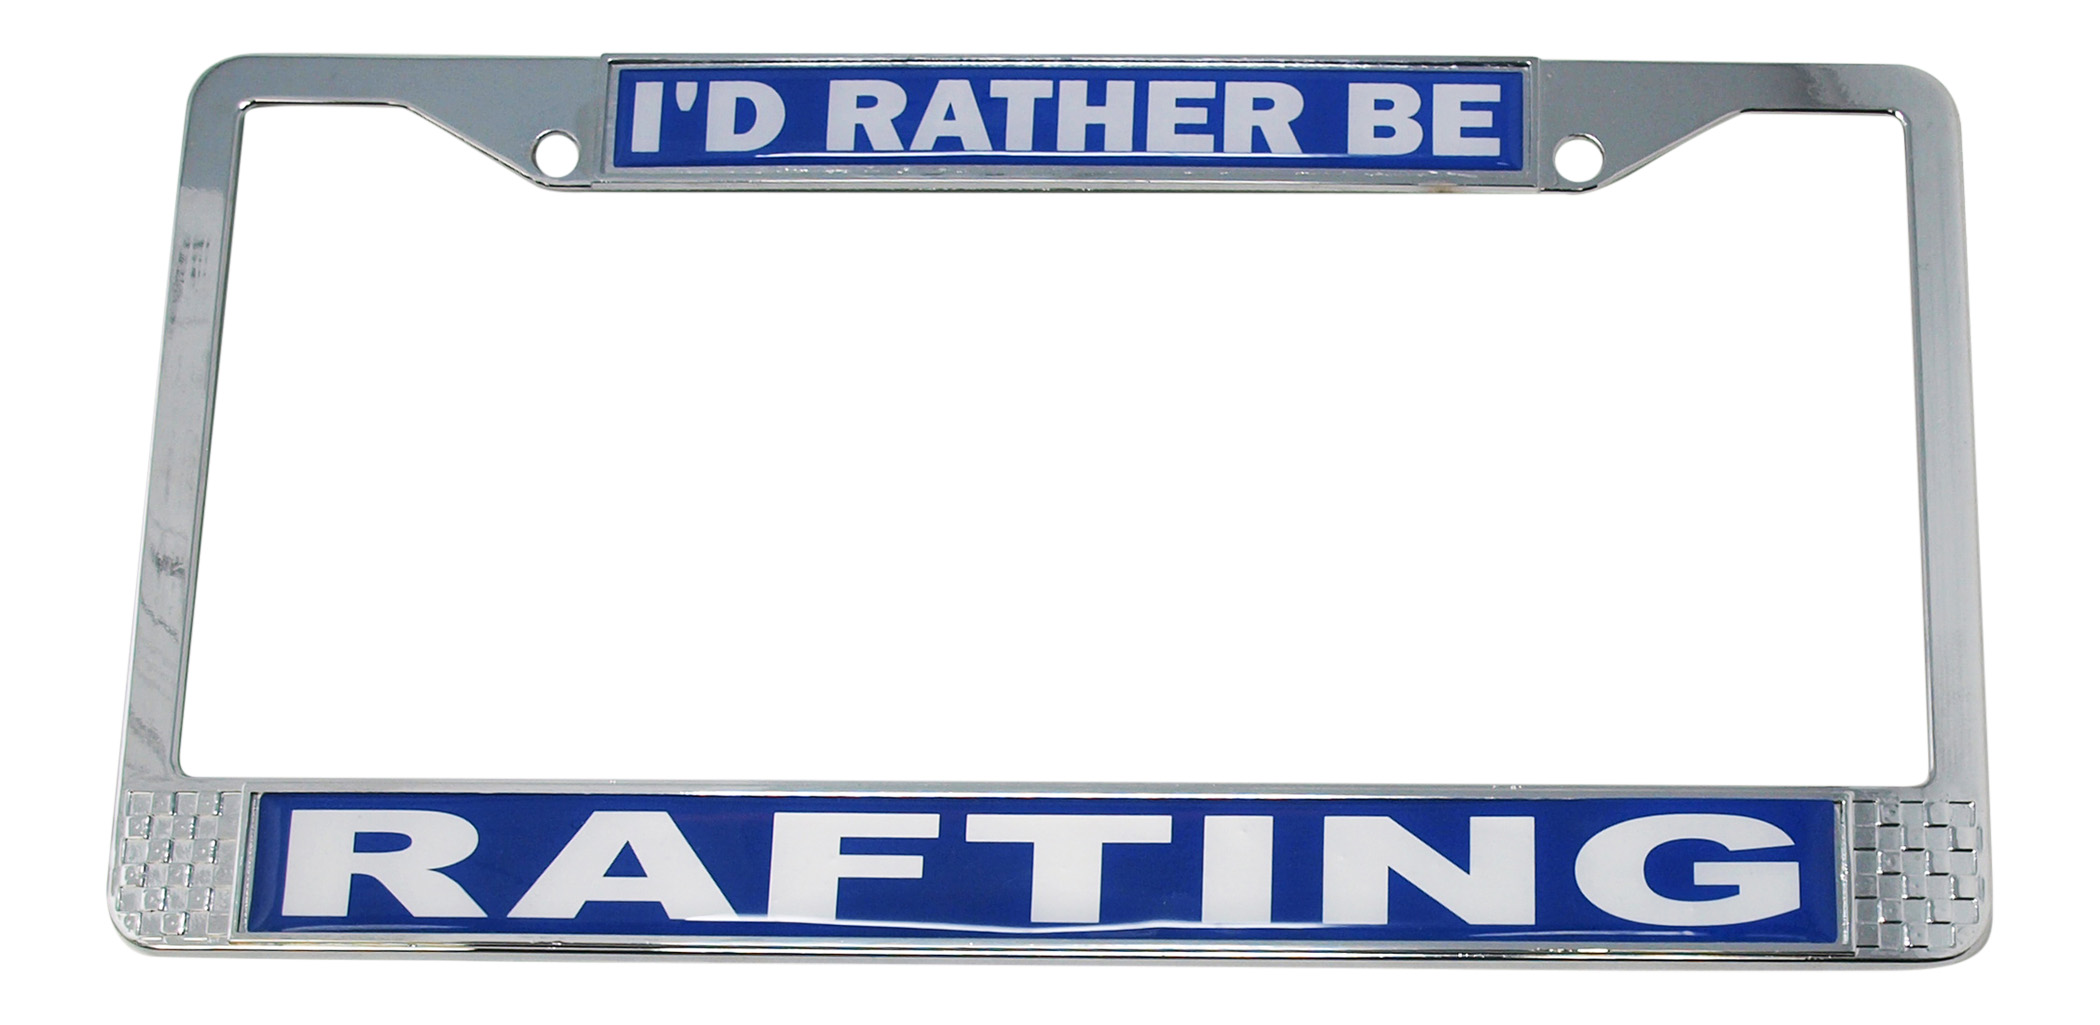 I'd Rather Be Rafting License Plate Frame - Click Image to Close